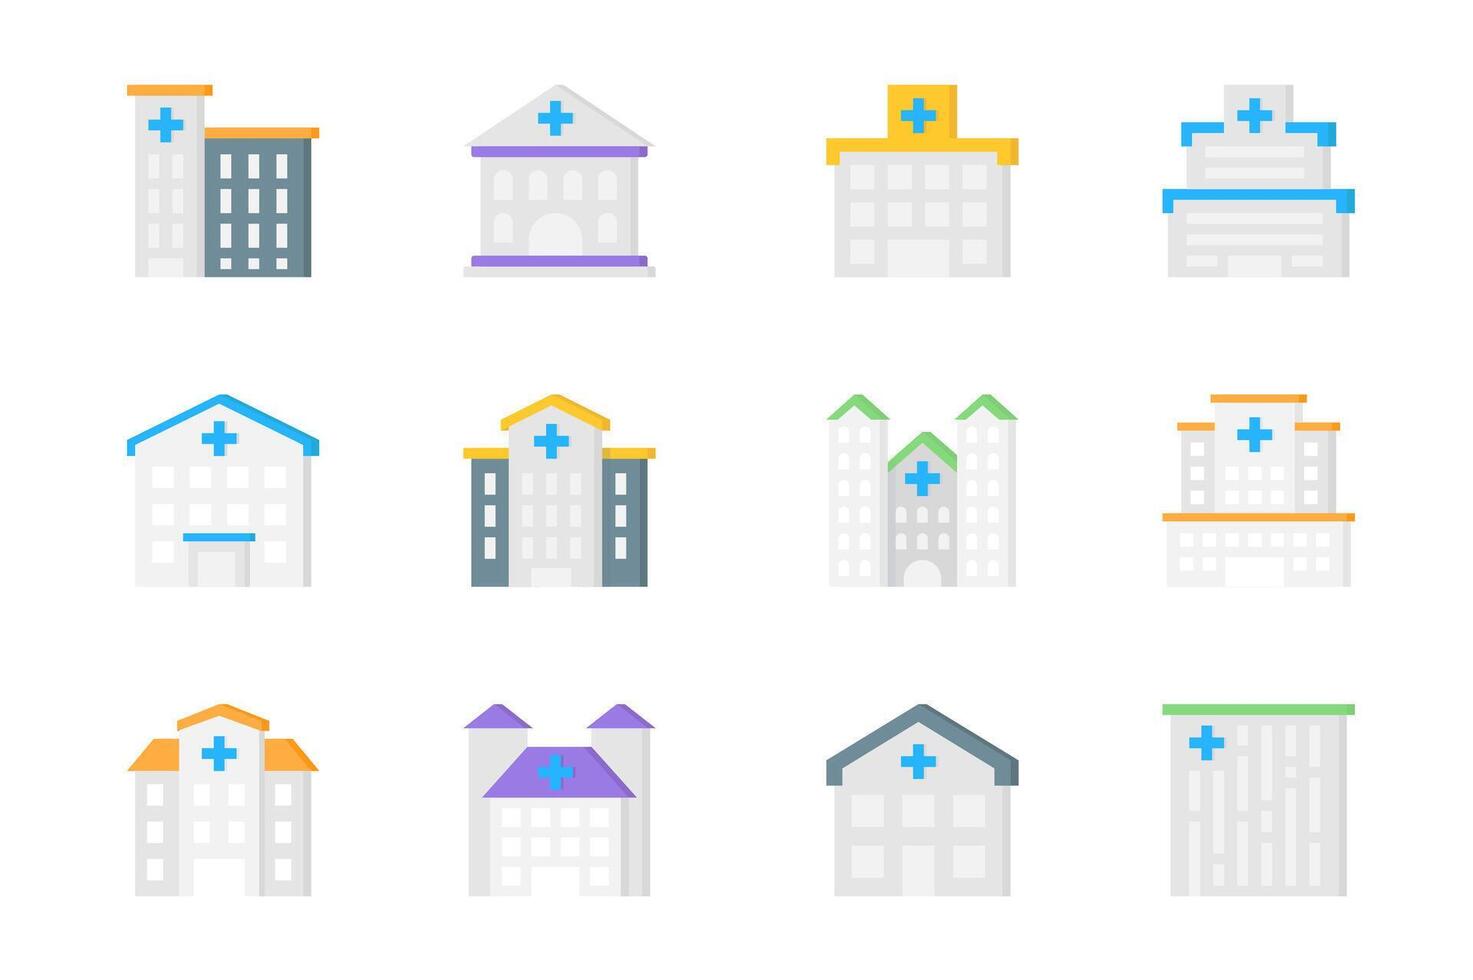 Hospital buildings 3d icons set. Pack flat pictograms of different types of exterior clinics, medical center, pharmacy, ambulance and other constructions. Vector elements for mobile app and web design